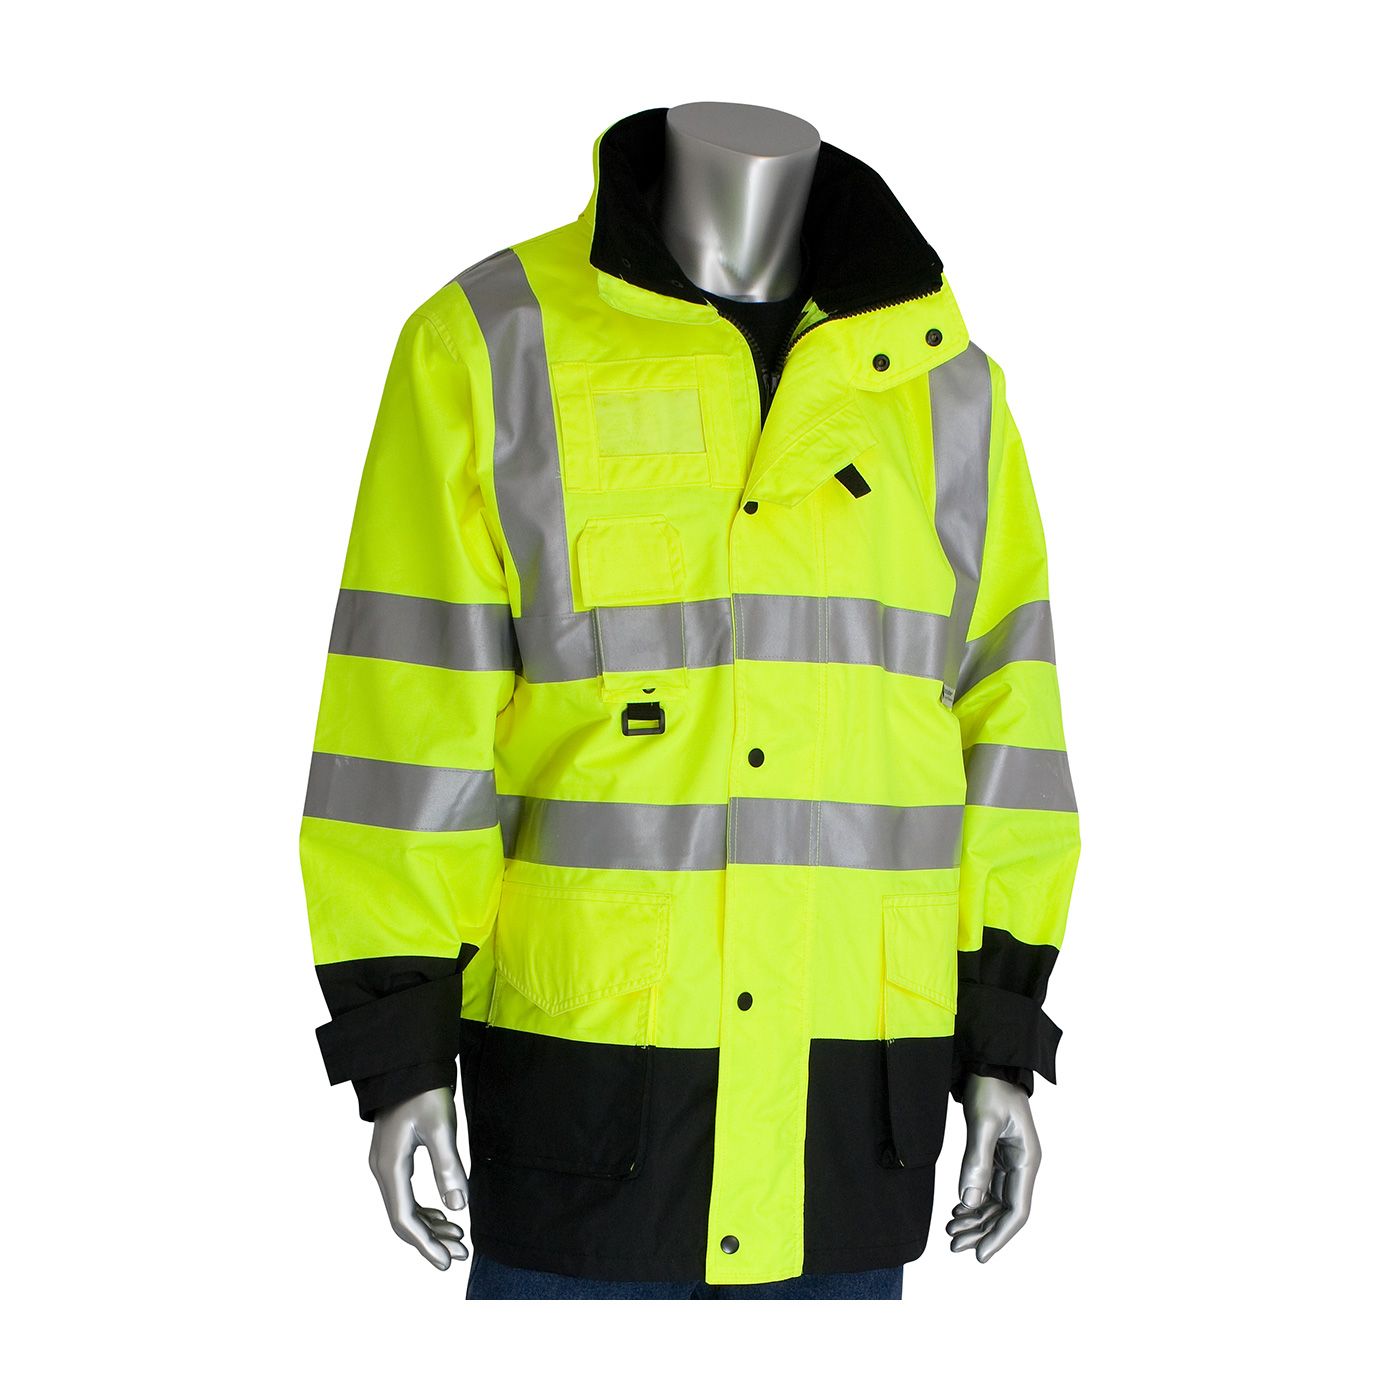 PIP ANSI TYPE R CLASS 3 ALL CONDITIONS 7 IN 1 COAT CLASS 2 INNER JACKET AND VEST COMBINATION Yellow 1 EA